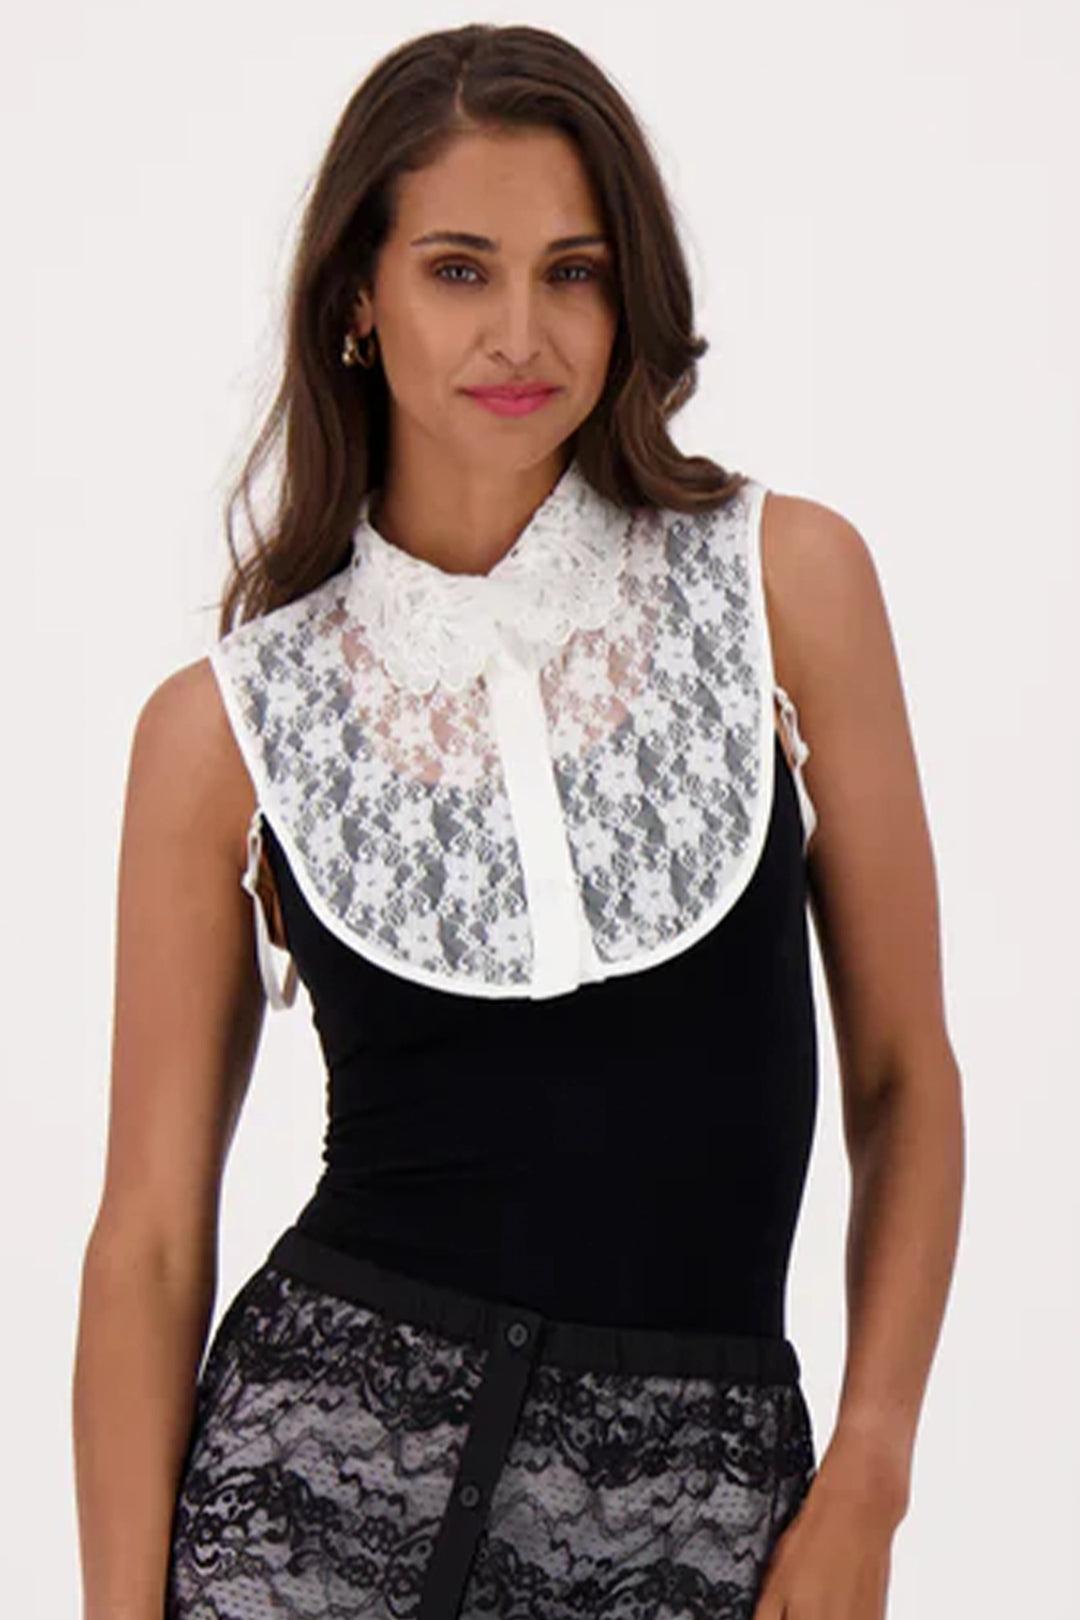 This accessory is crafted with lovely lace and adjustable straps, making it a great addition to your wardrobe.